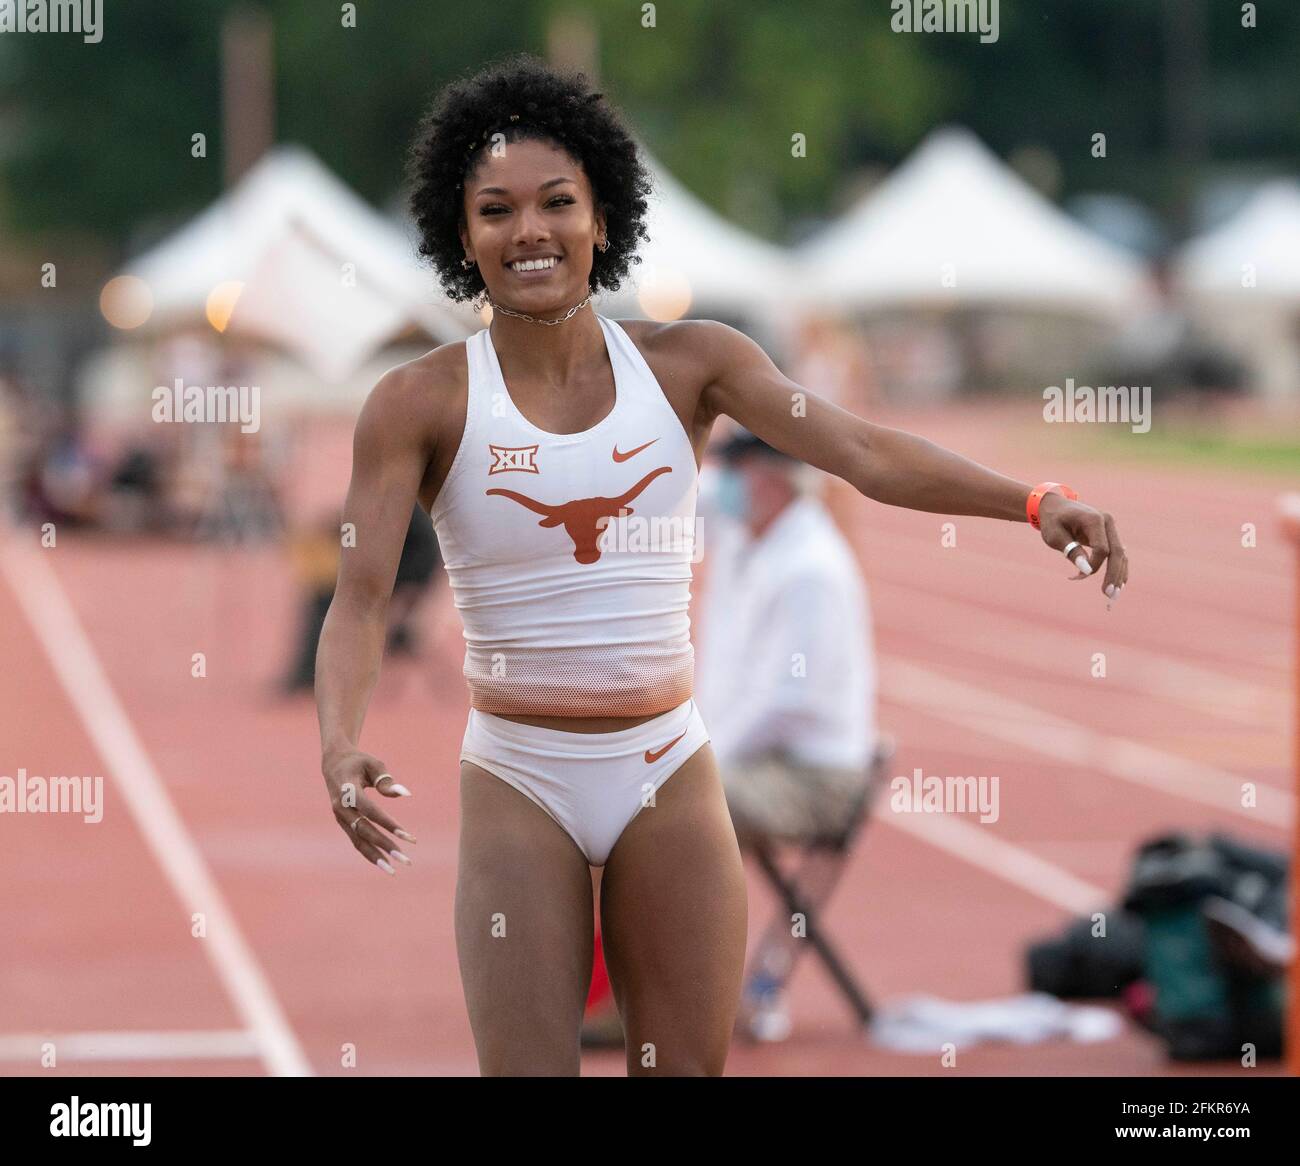 Austin, Texas, USA. 30th Apr, 2021. Texas women's long jump ace TARA DAVIS soars to an easy victory at the Texas Invitational as she continues a quest for a spot on the 2021 U.S. Olympic team. Davis, a junior, beat a 35-year old record in the Texas Relays set in 1985 by Olympic legend Jackie Joyner-Kersee Credit: Bob Daemmrich/ZUMA Wire/Alamy Live News Stock Photo